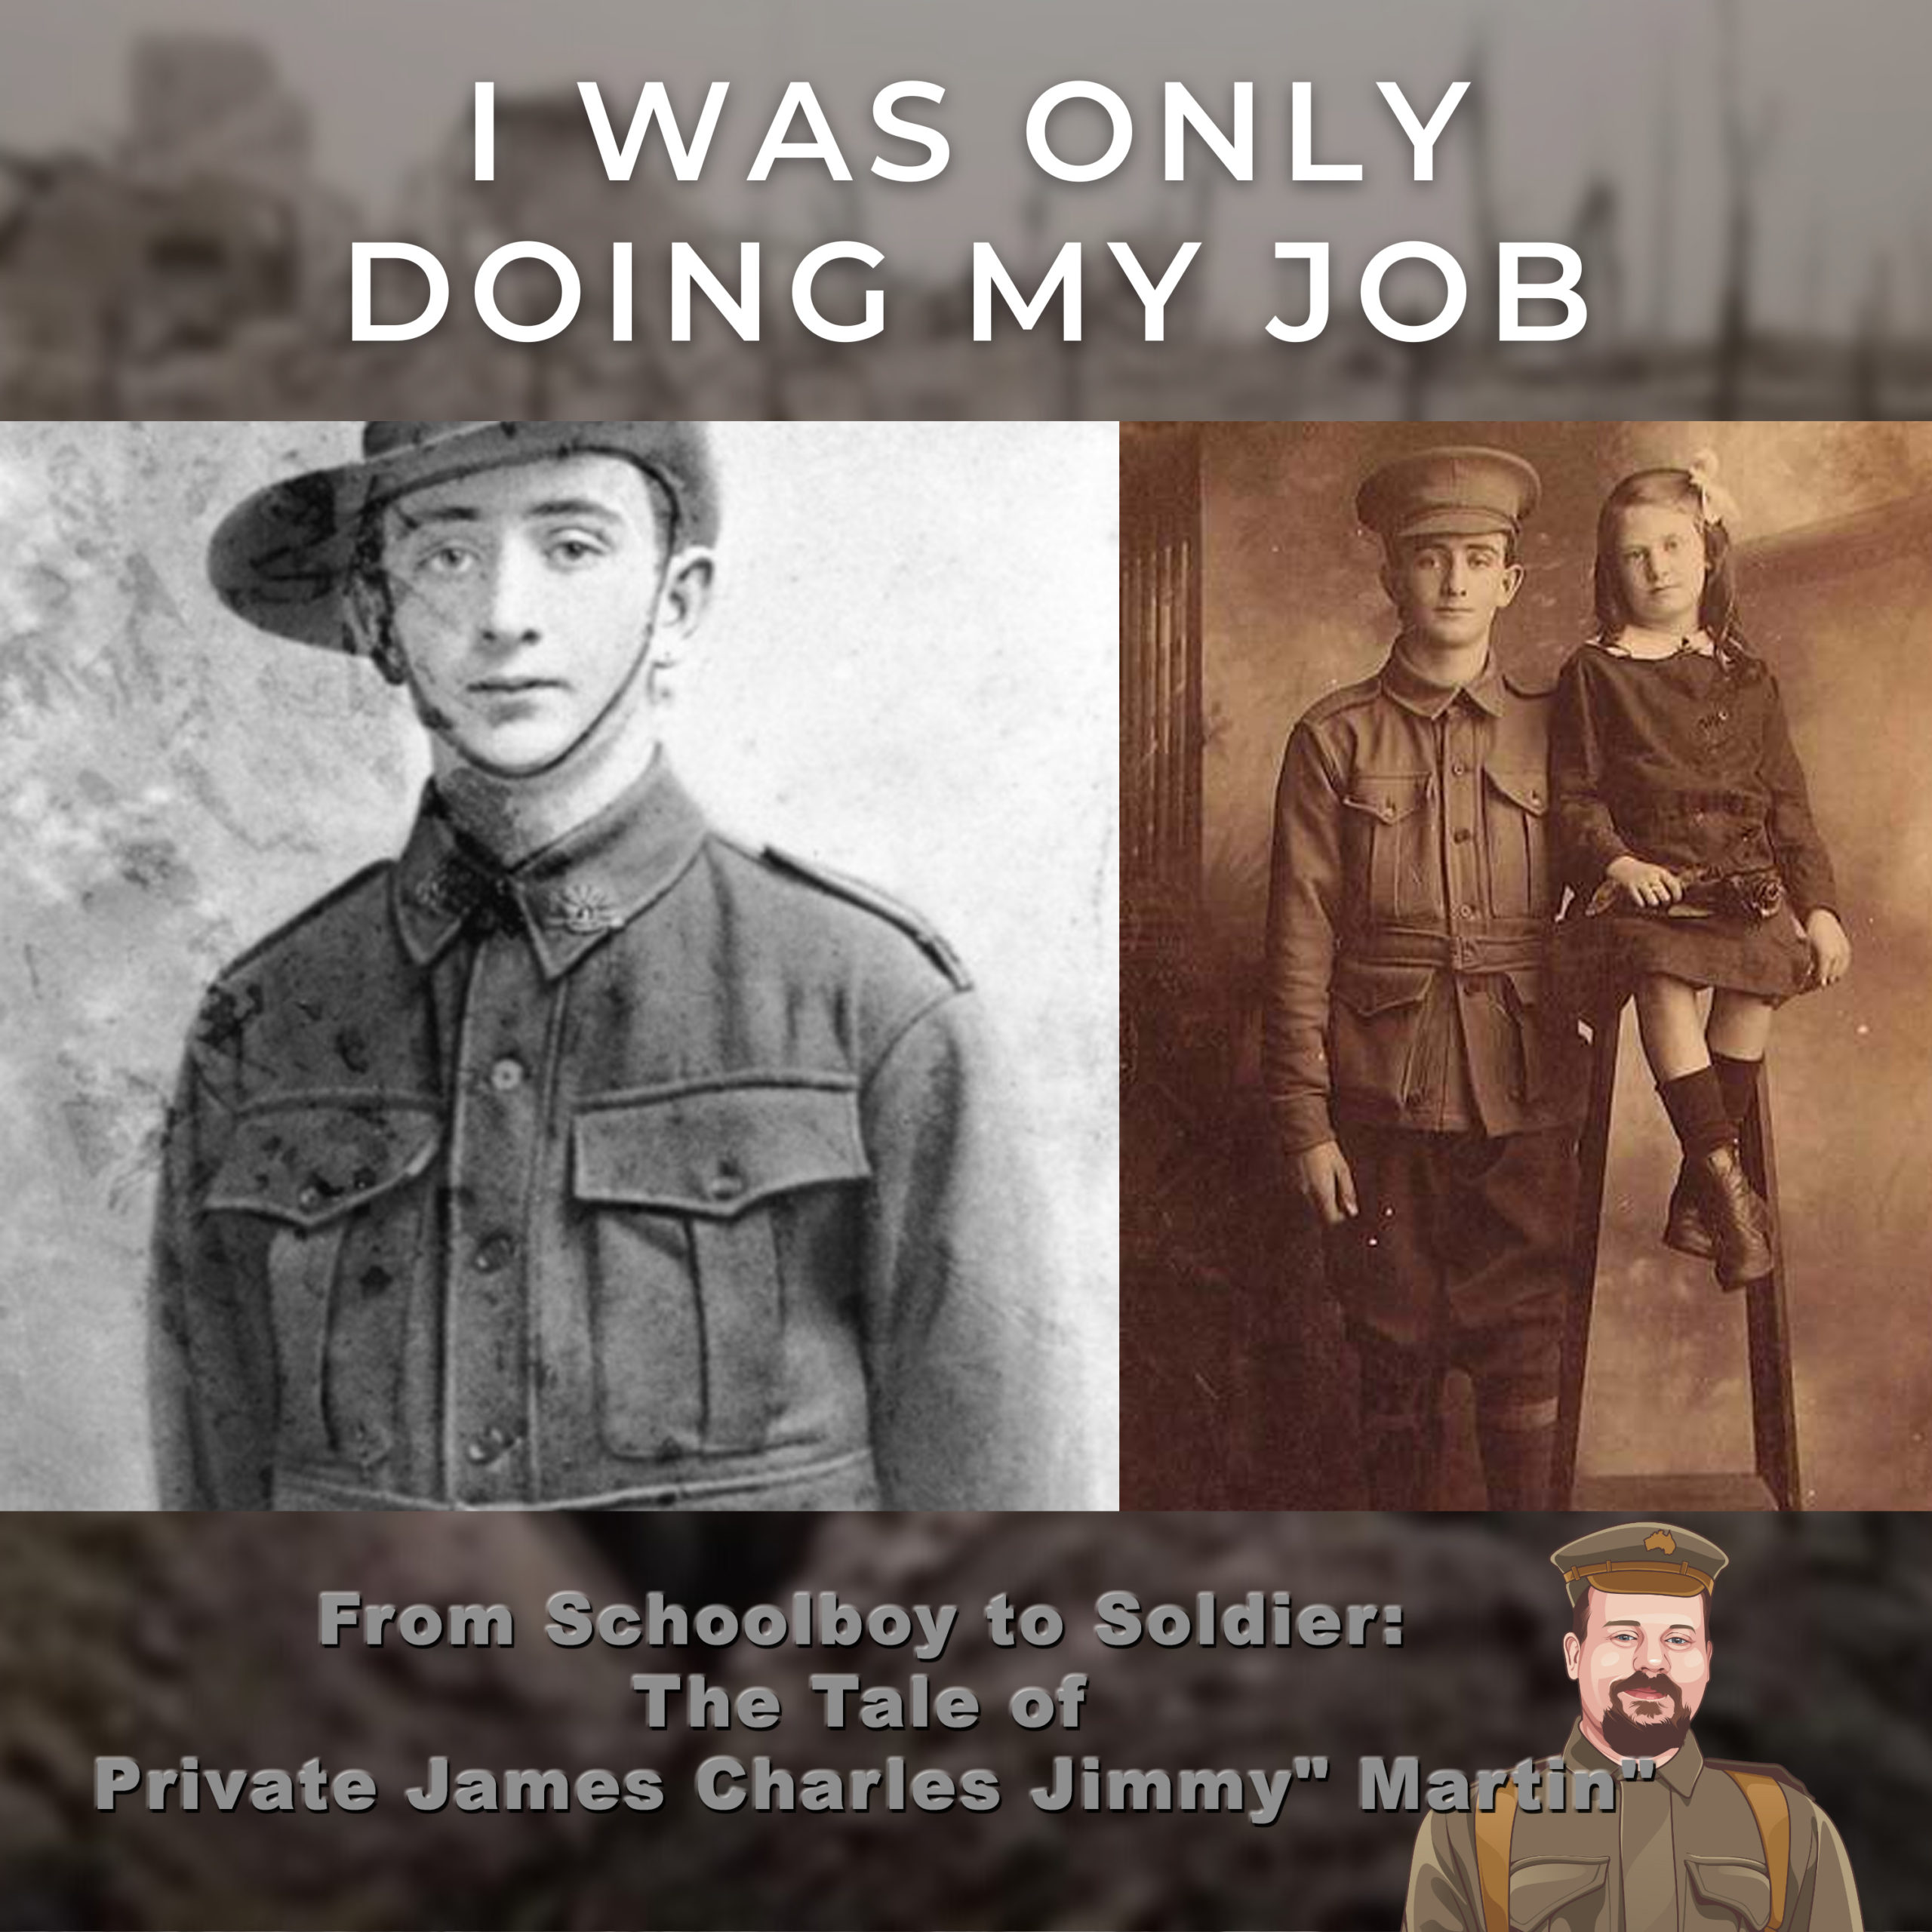 From Schoolboy to Soldier: The Tale of Private James Charles “Jimmy” Martin